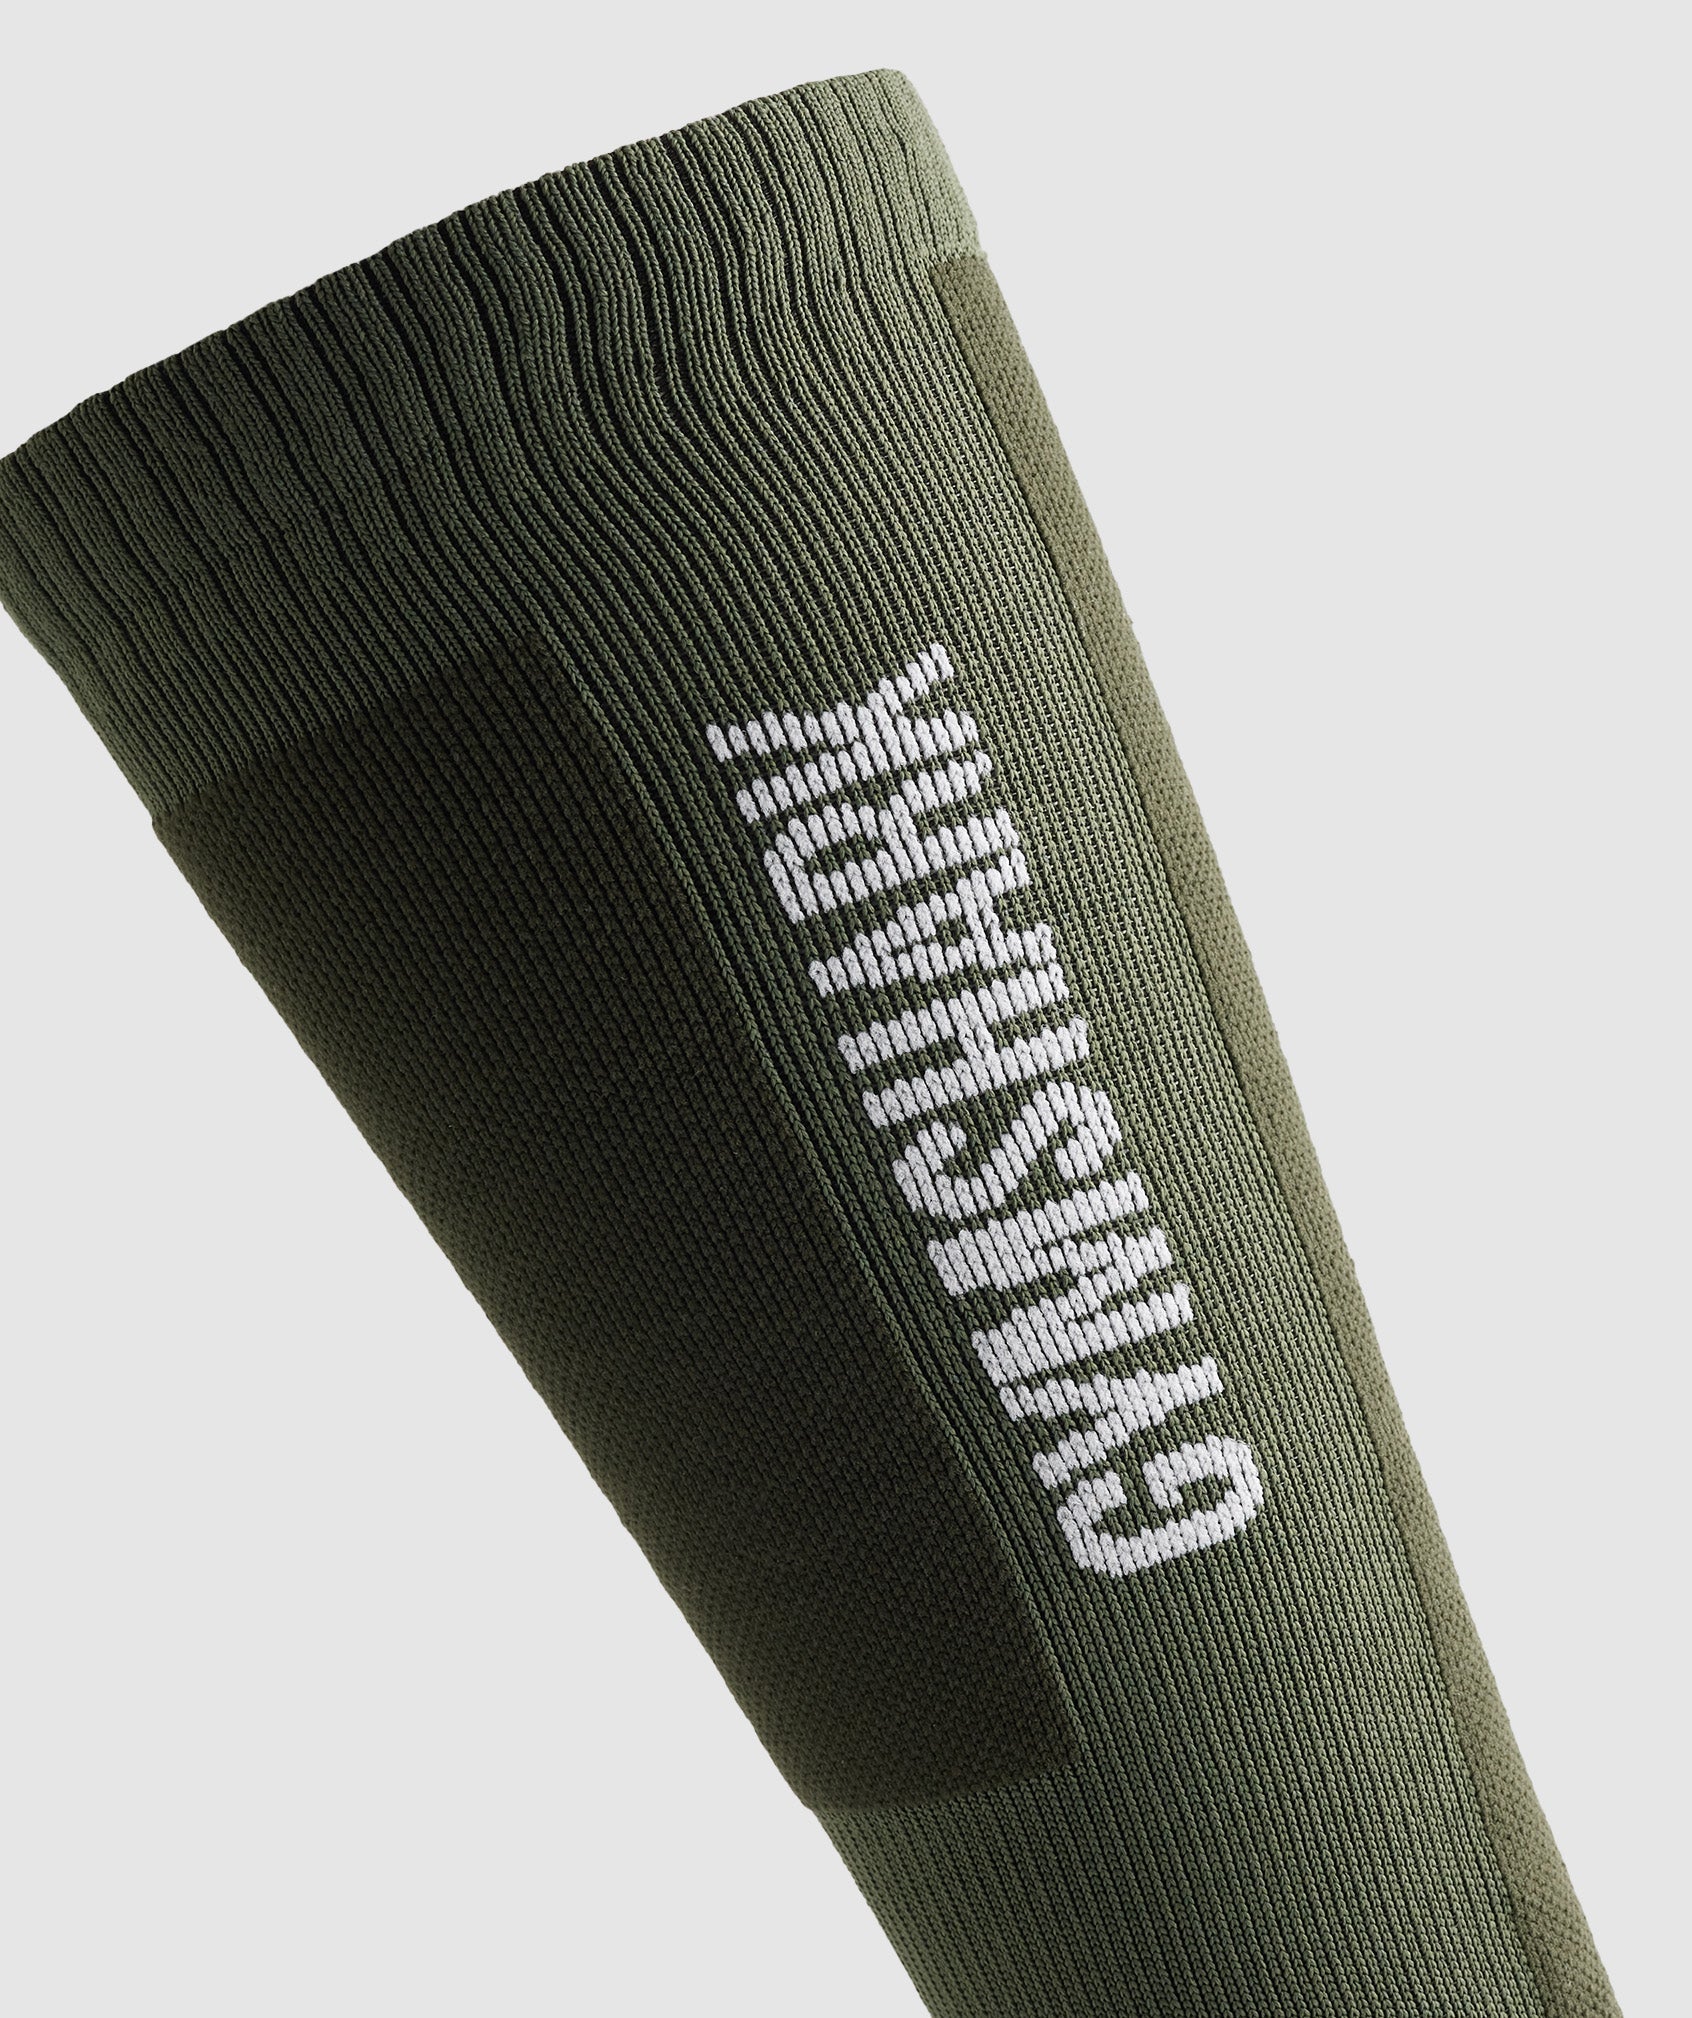 Weightlifting Sock in Olive Green